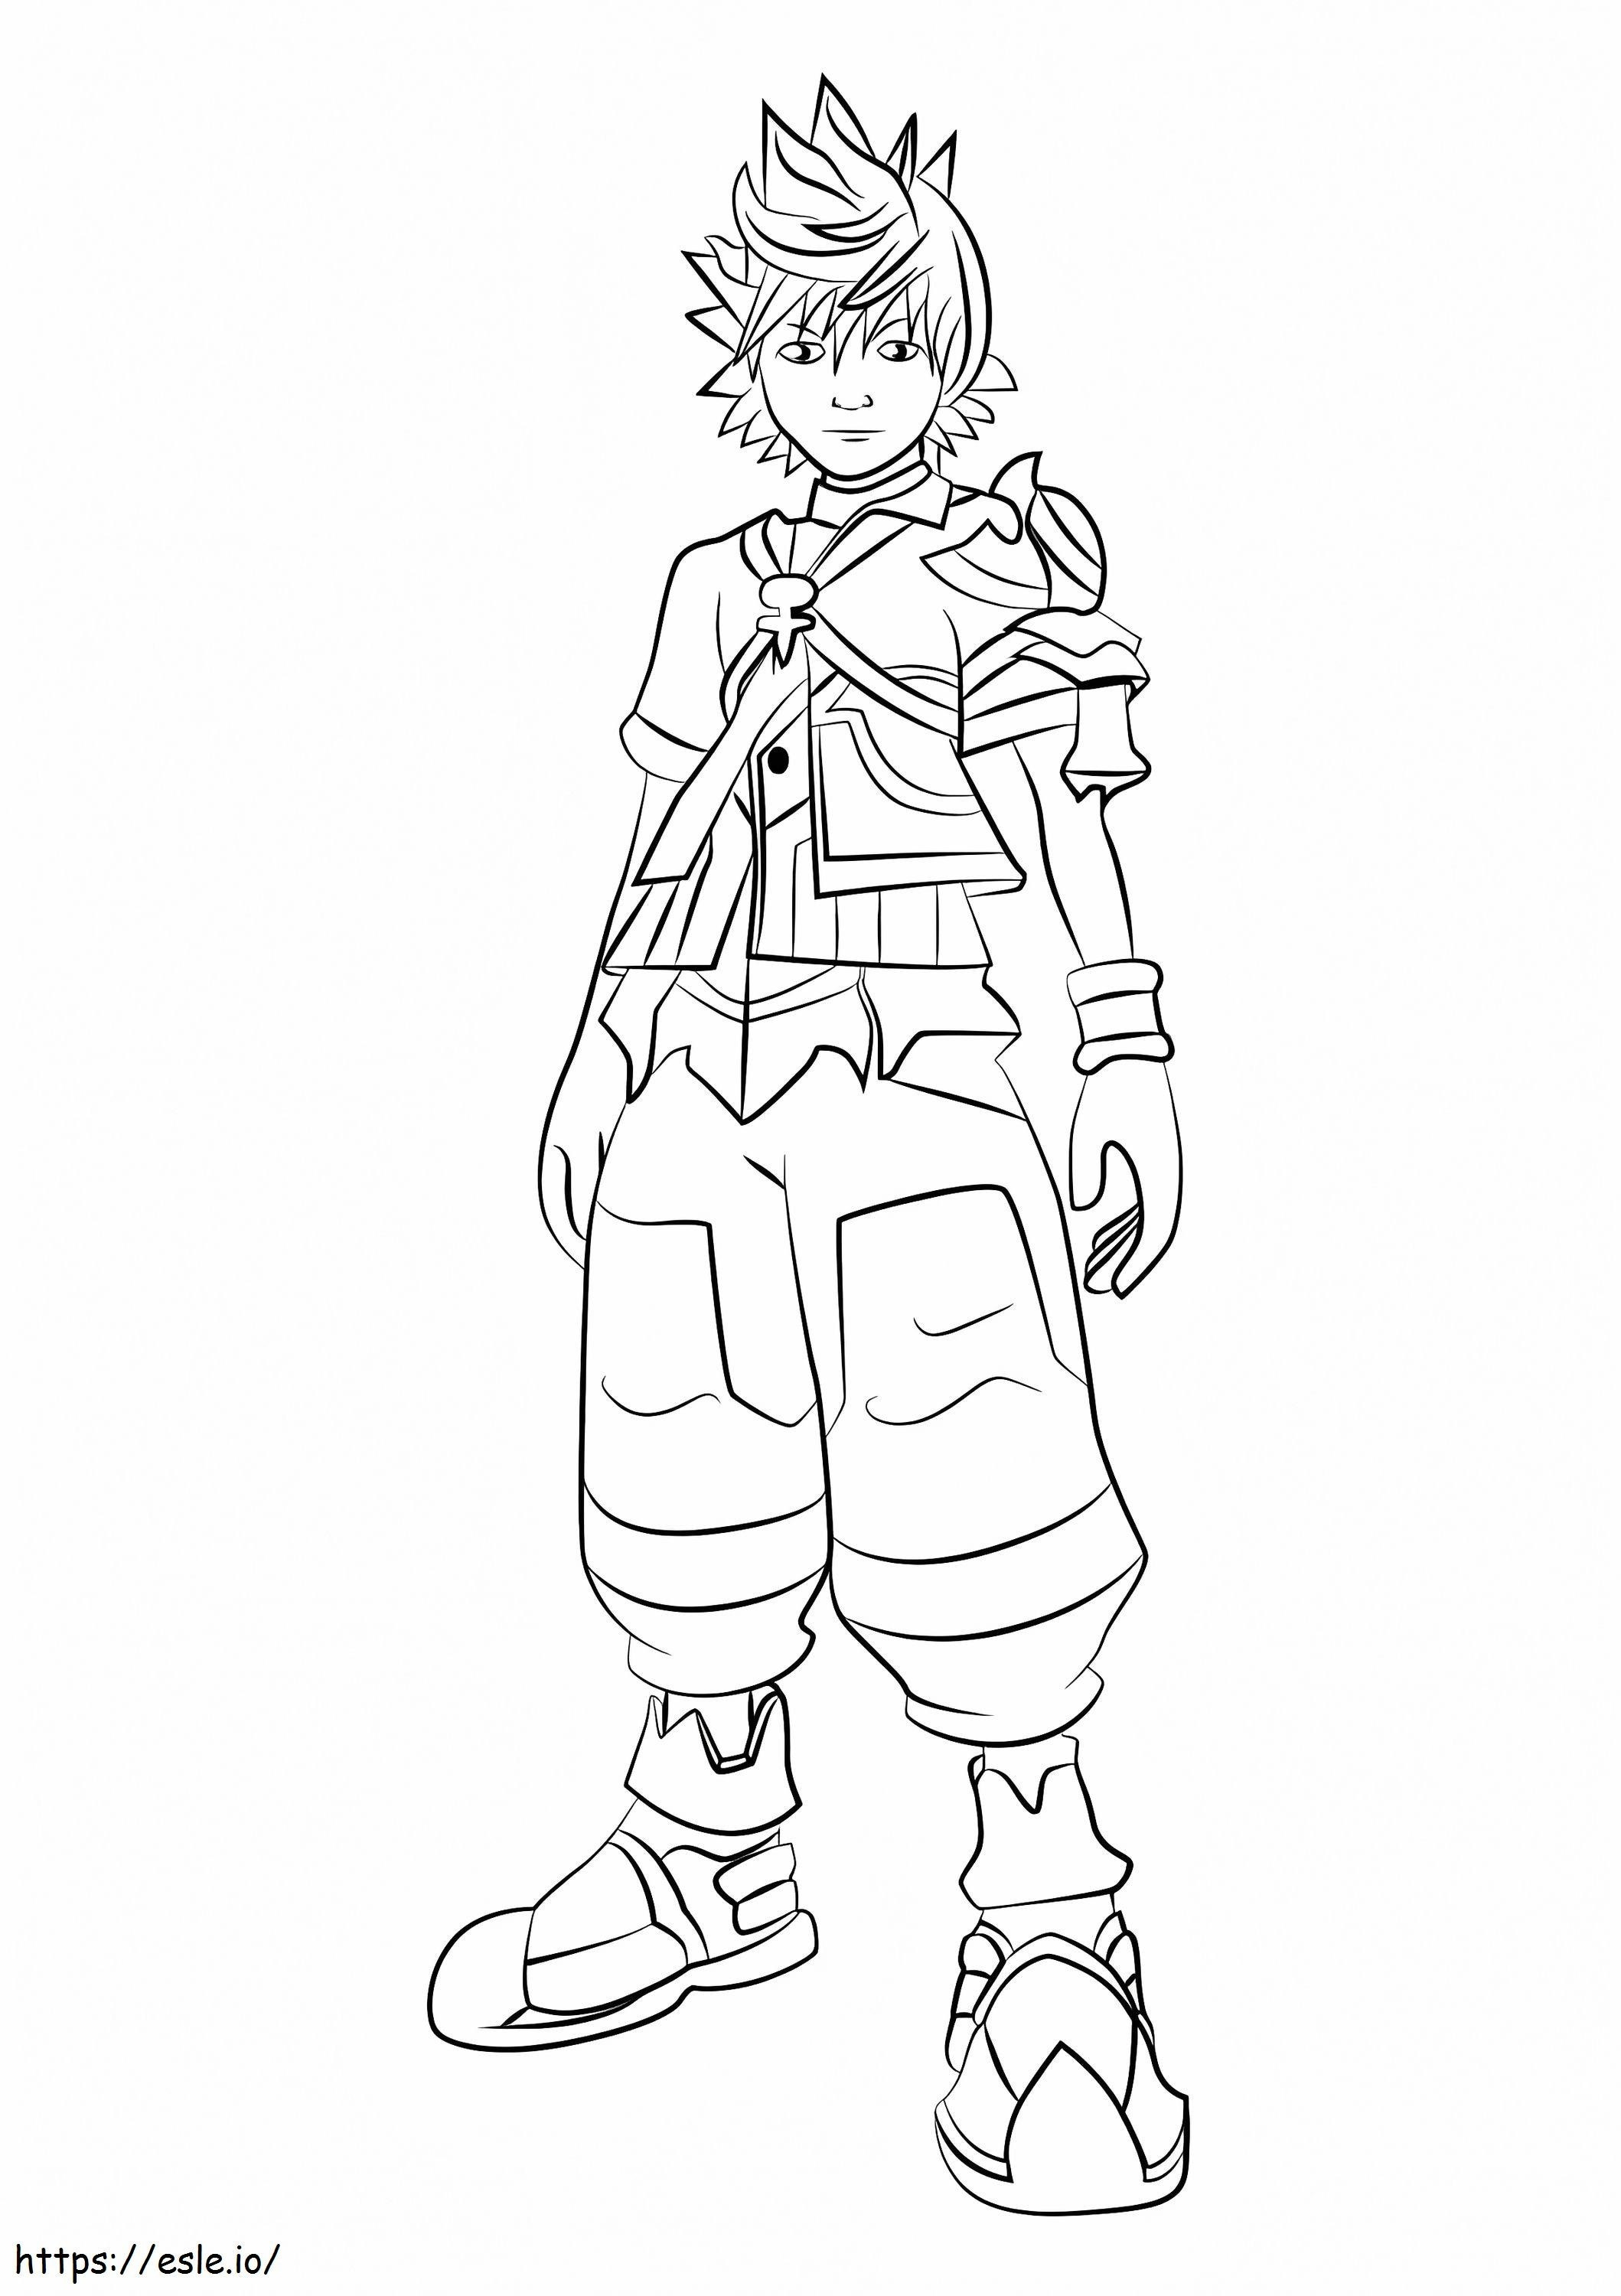 Ventus From Kingdom Hearts coloring page